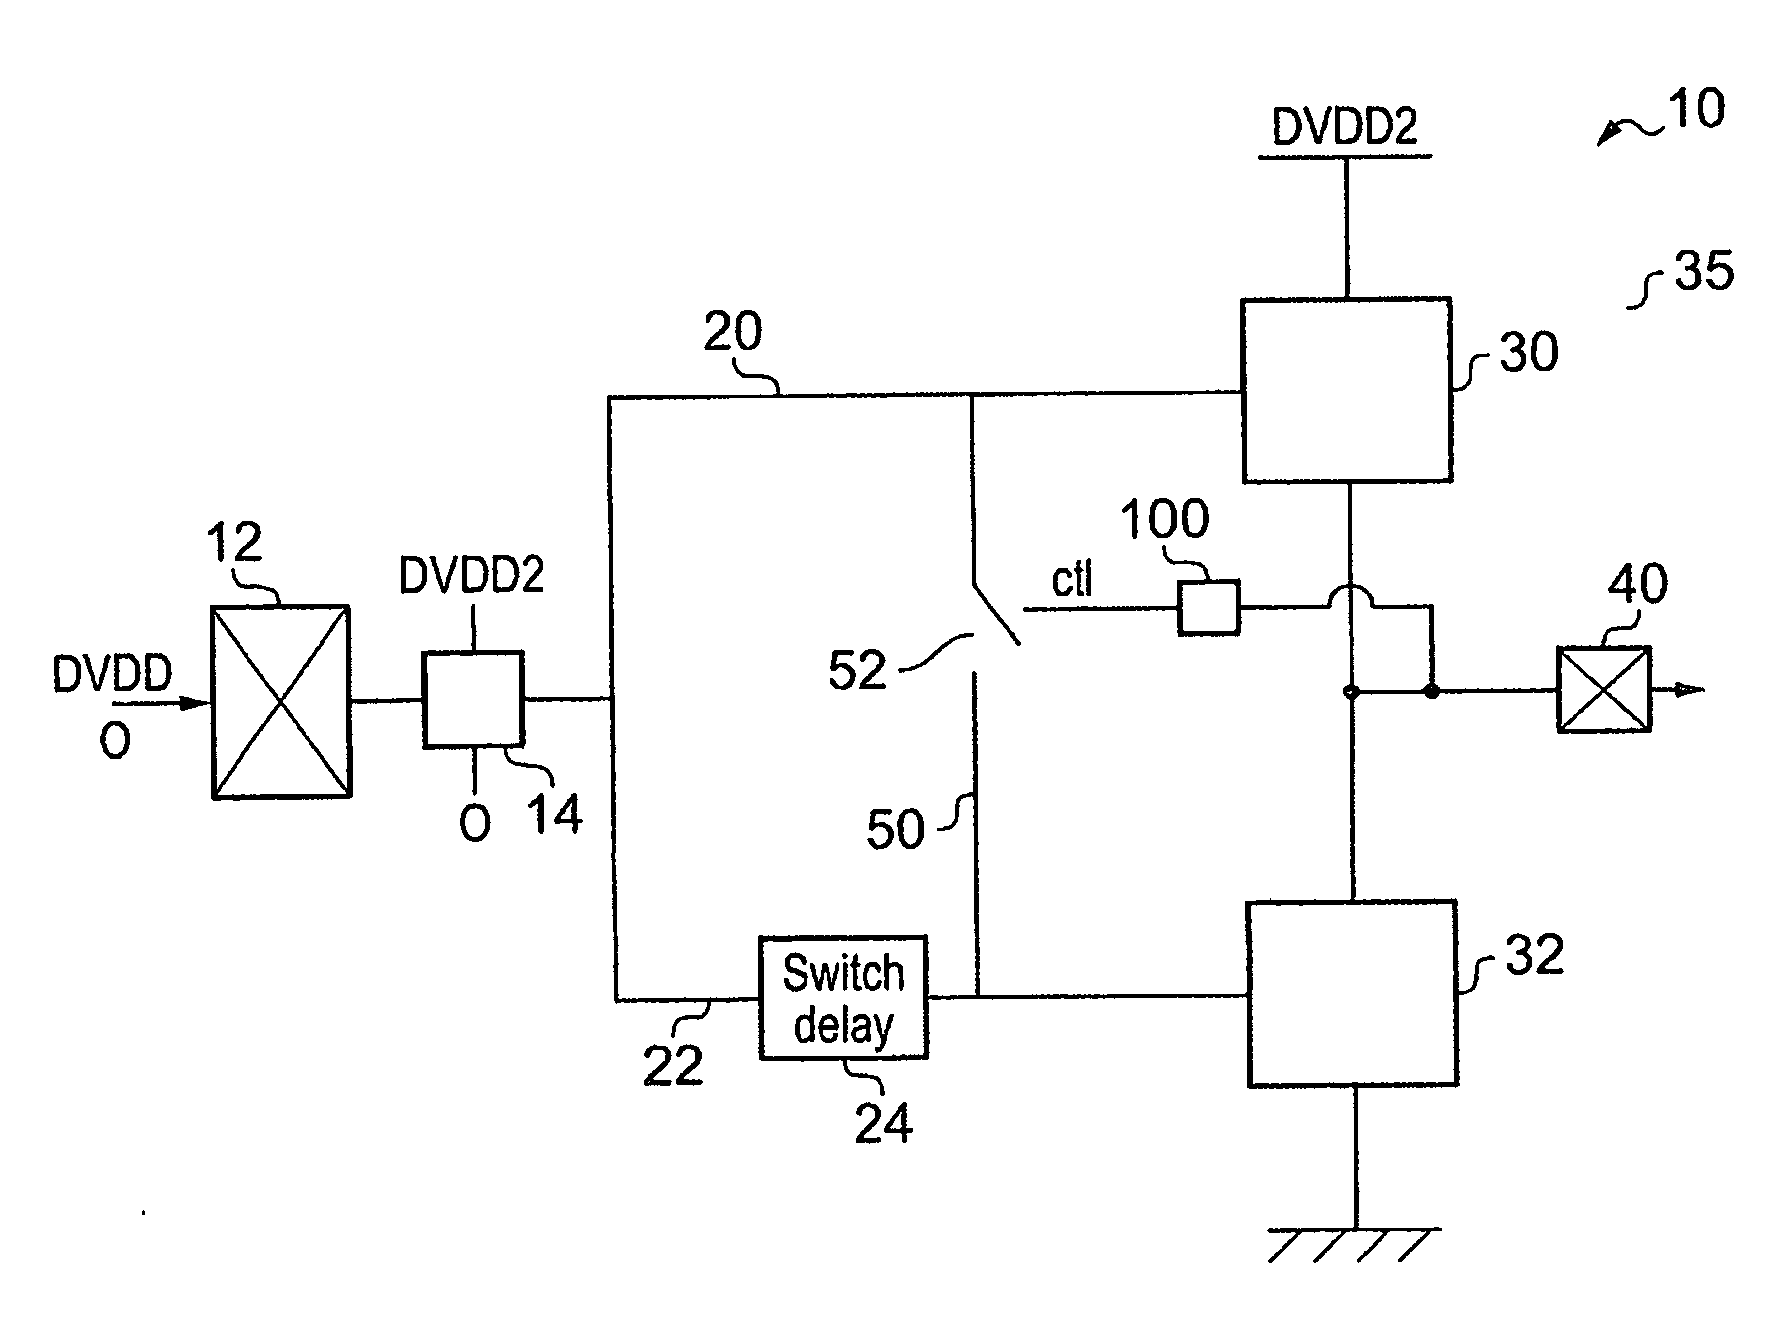 Circuitry for processing signals from a higher voltage domain using devices designed to operate in a lower voltage domain